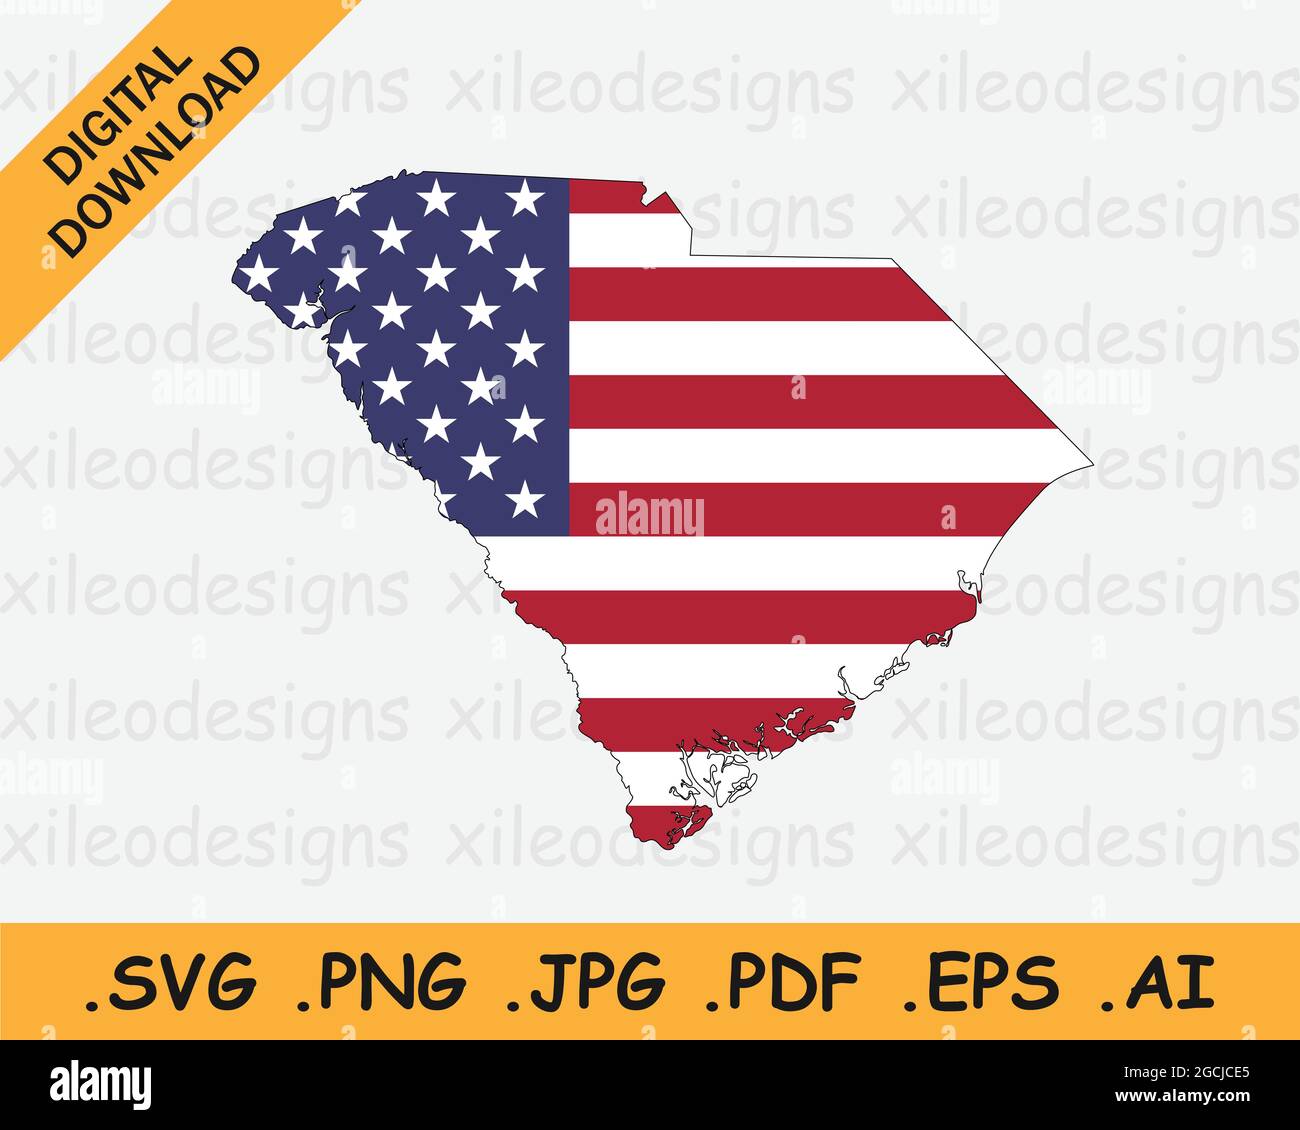 South Carolina Map on American Flag. SC, USA State Map on US Flag. EPS Vector Graphic Clipart Icon Stock Vector